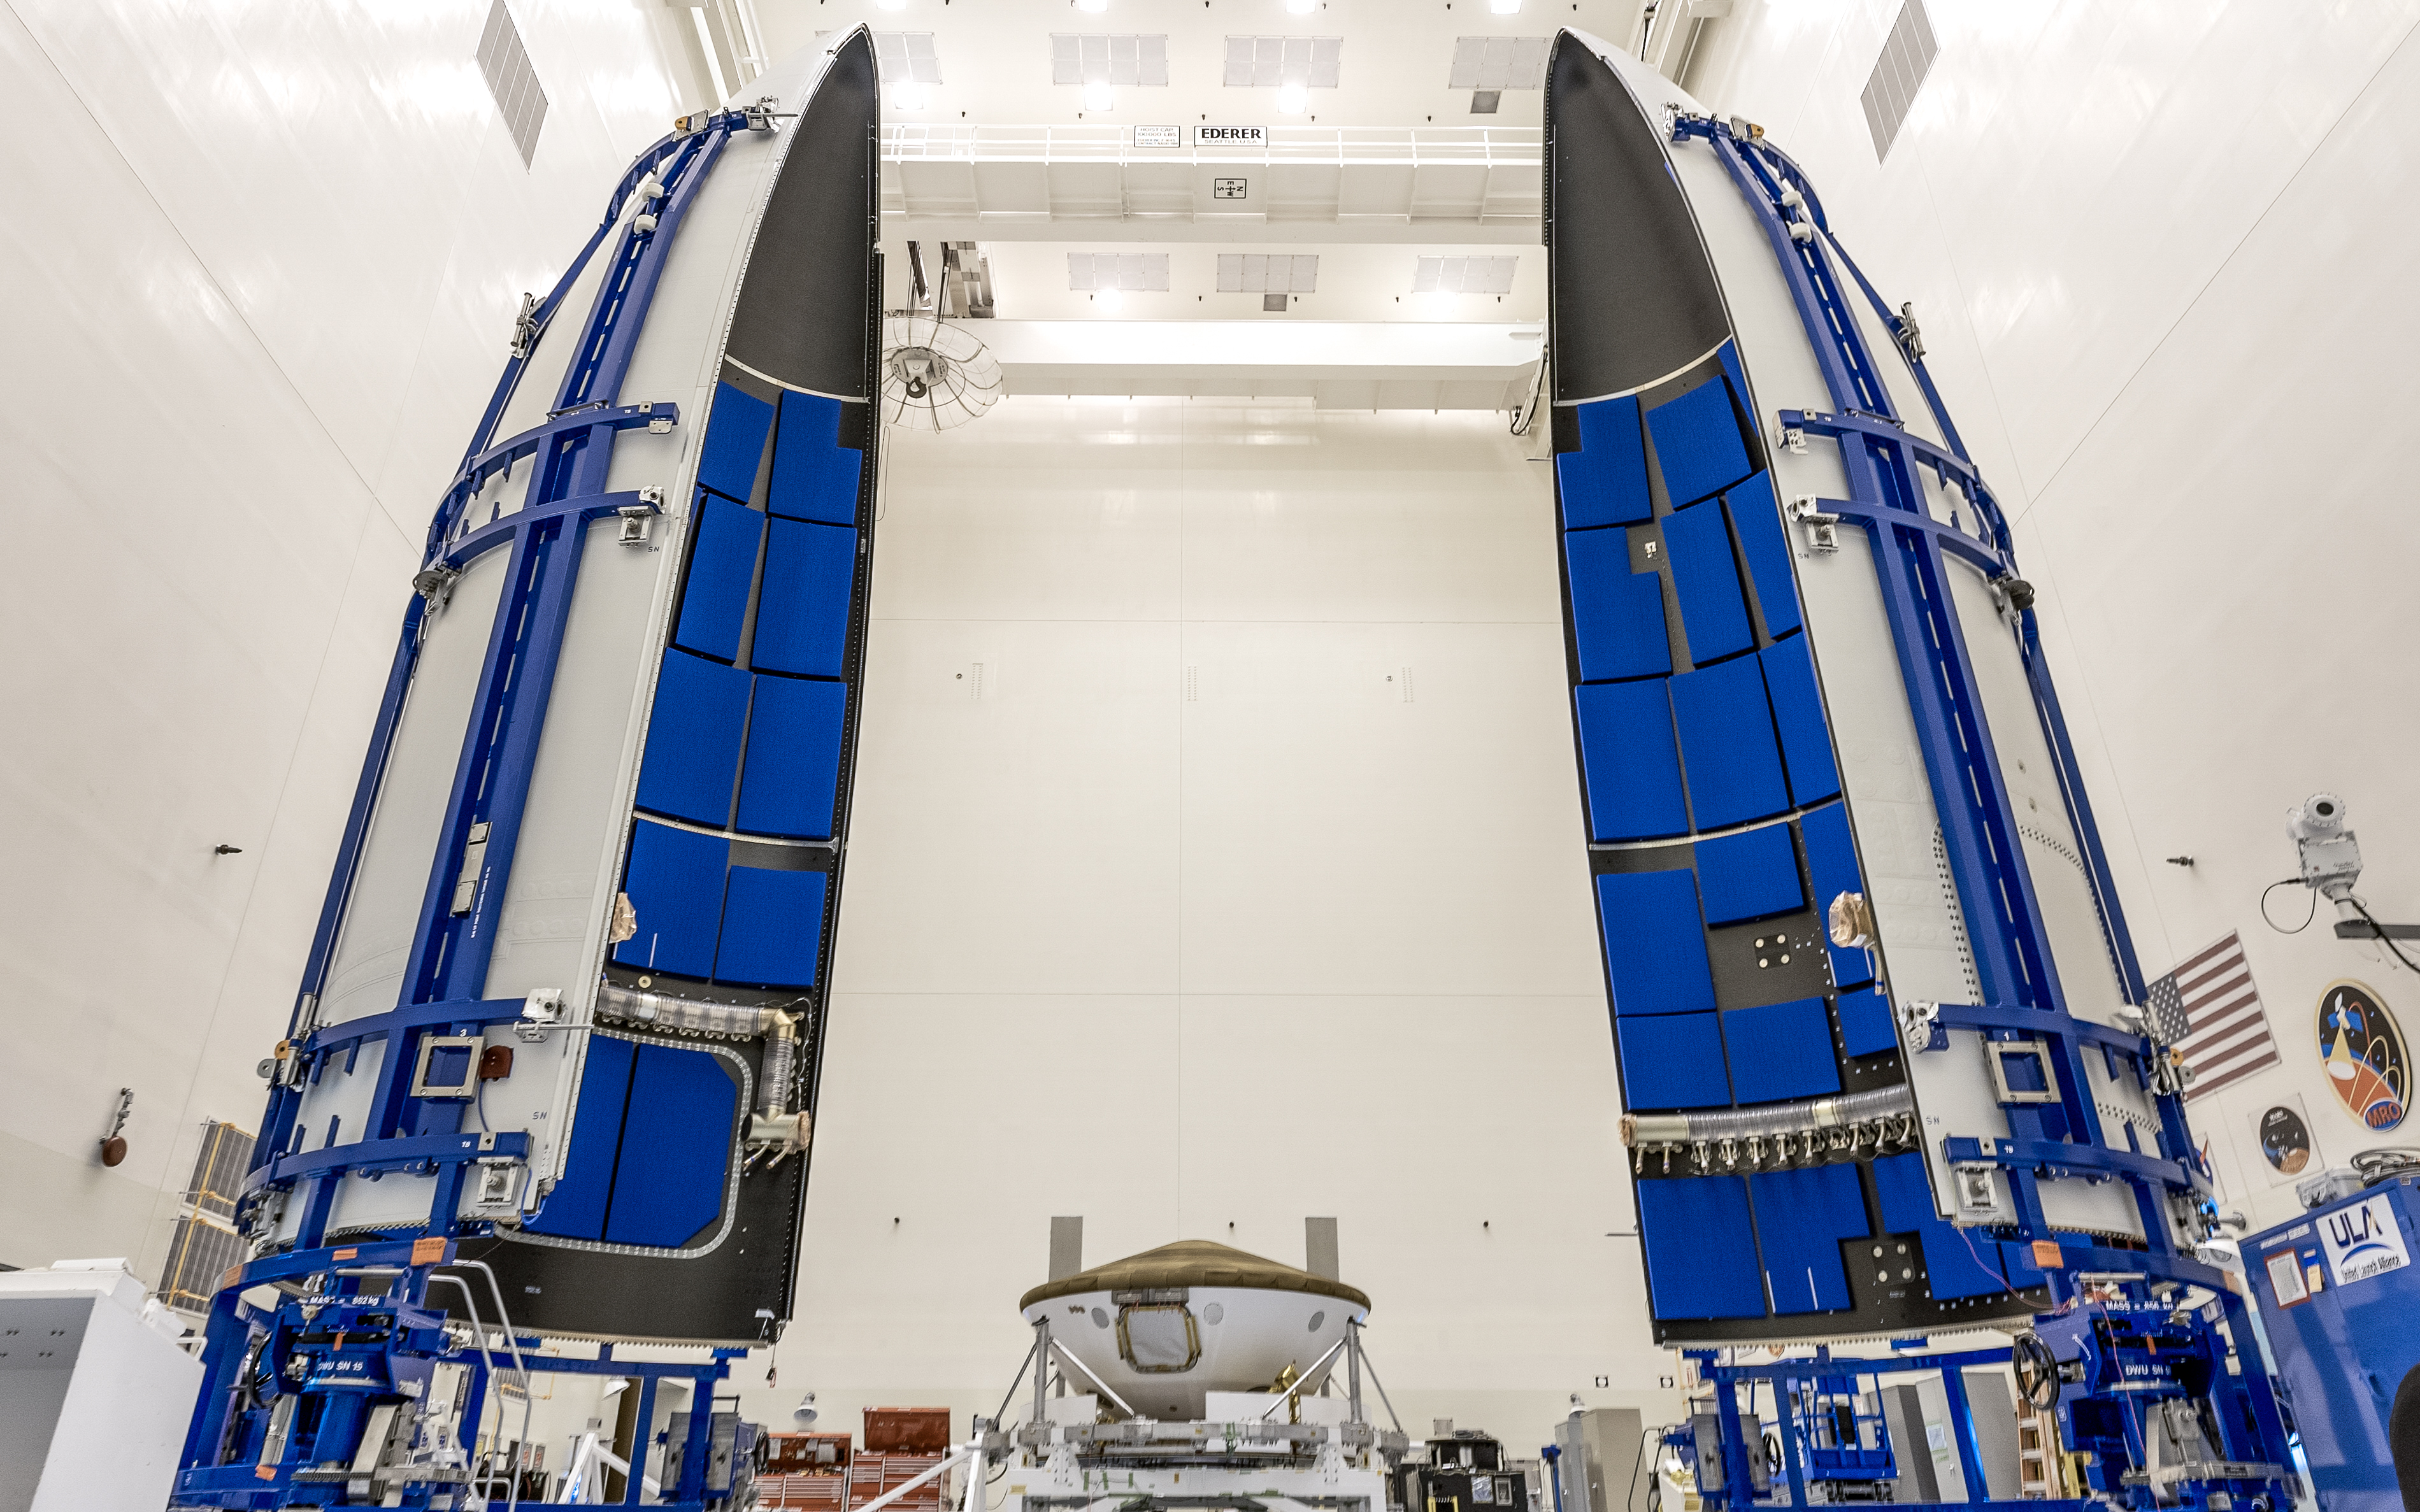 Perseverance rover is being prepared for encapsulation in the Atlas V payload fairing